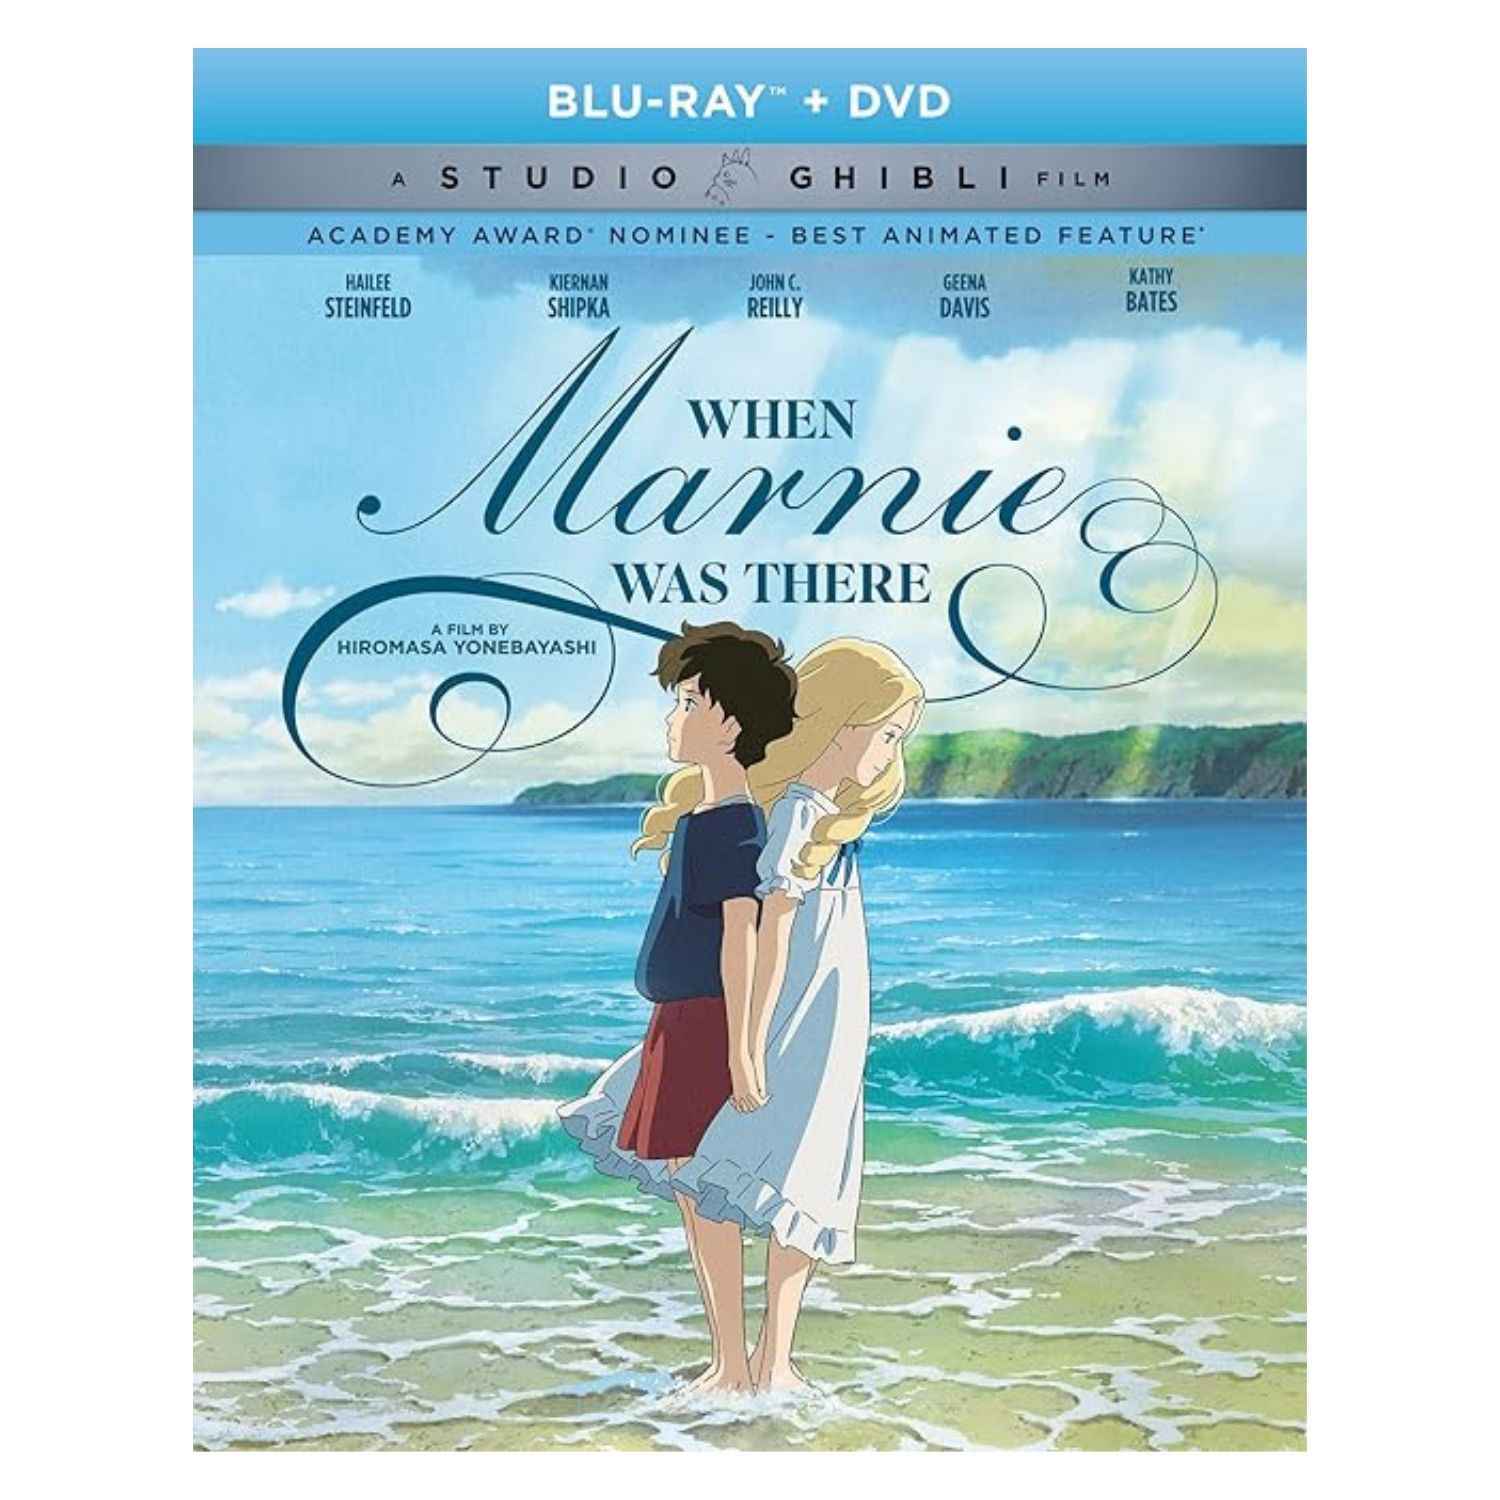 When marnie was there blu-ray cover